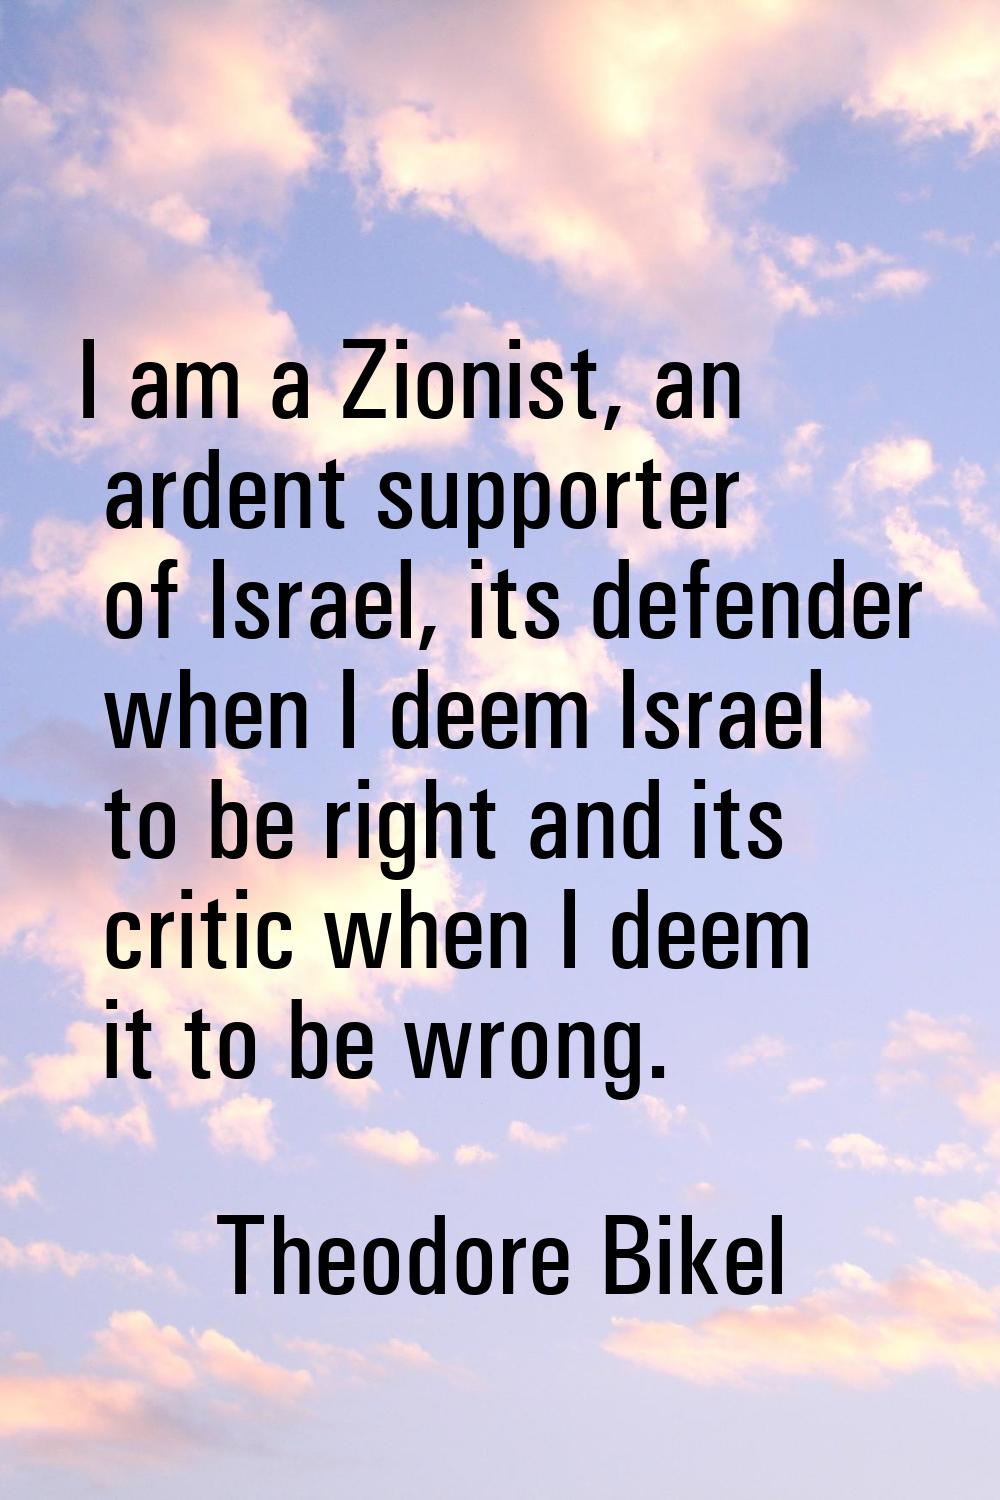 I am a Zionist, an ardent supporter of Israel, its defender when I deem Israel to be right and its 